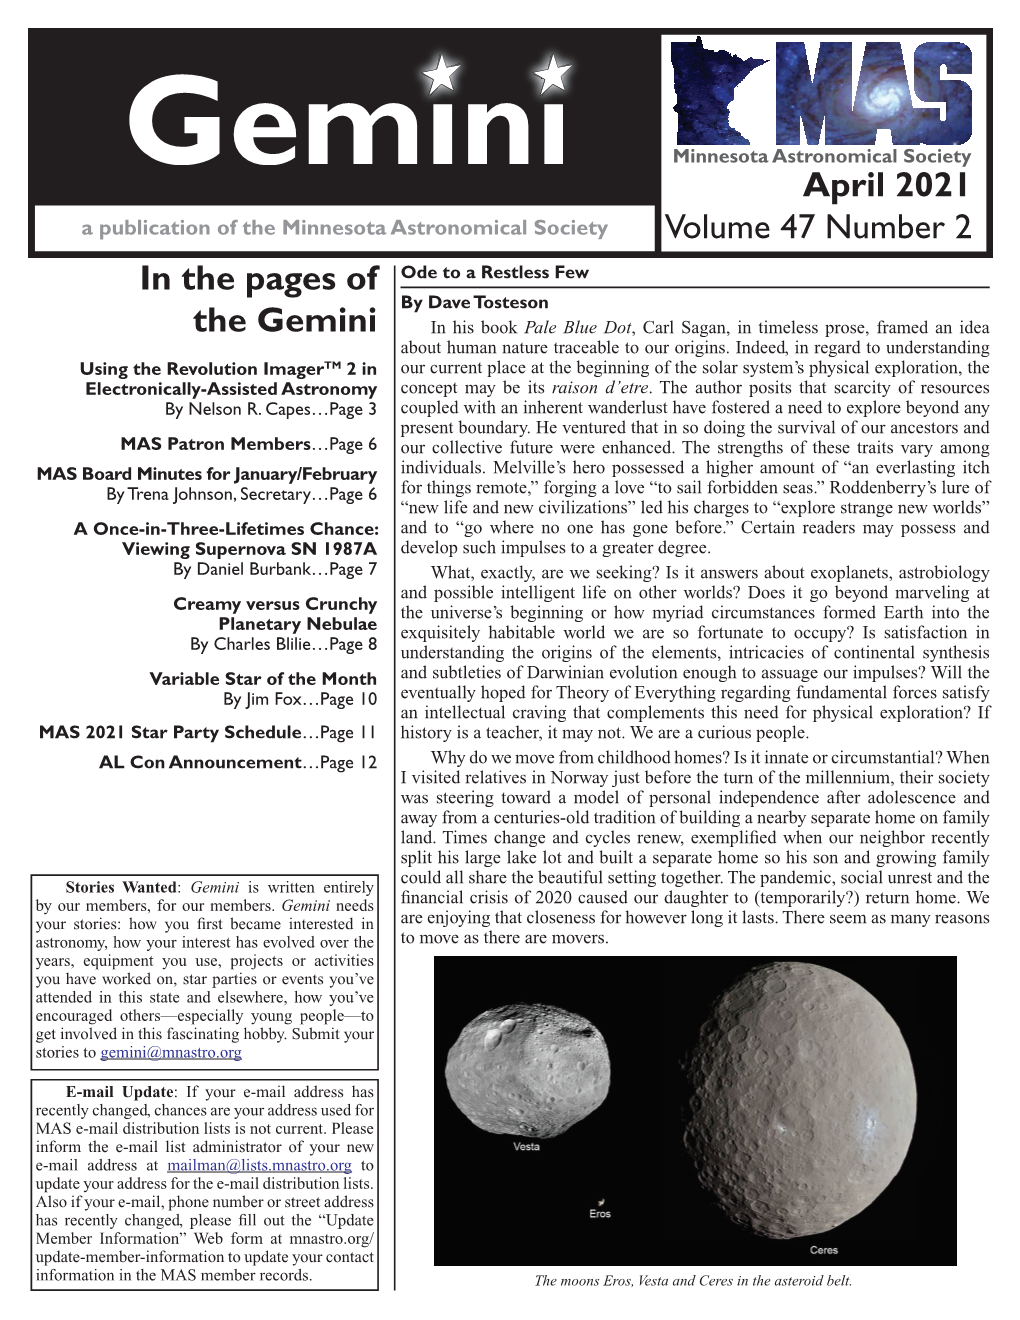 April 2021 Volume 47 Number 2 in the Pages of the Gemini